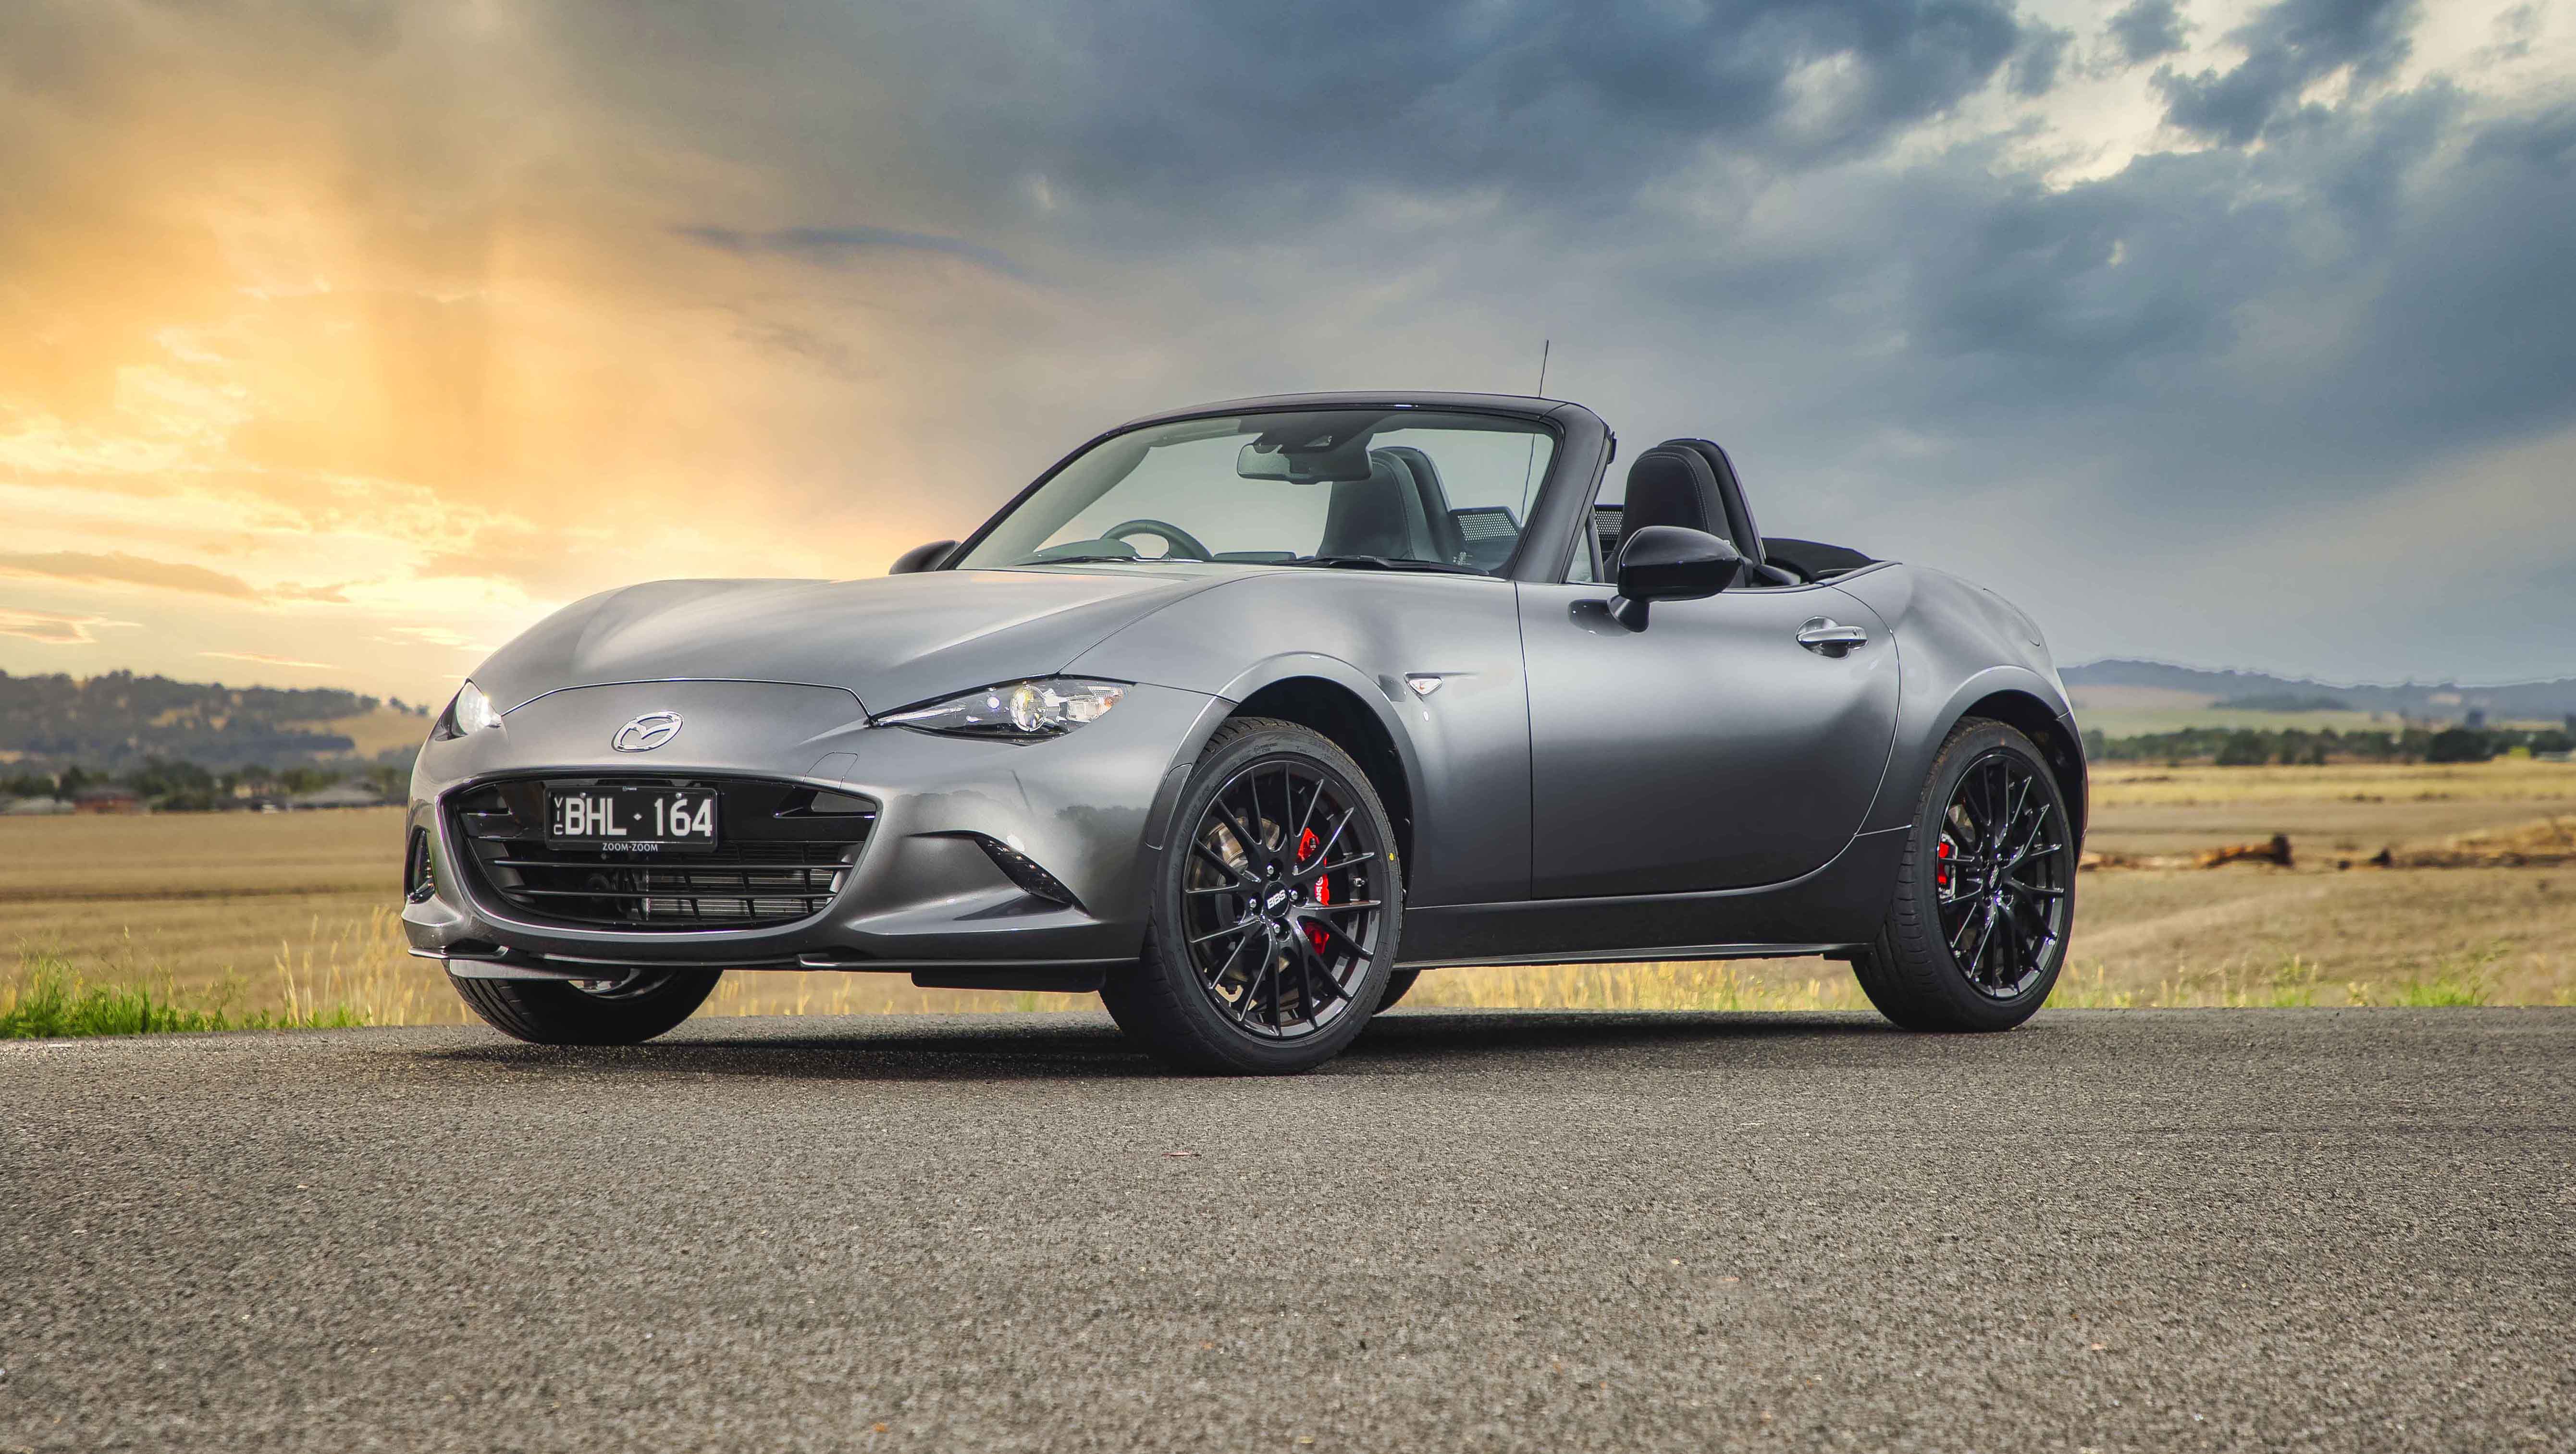 https://carsguide-res.cloudinary.com/image/upload/f_auto%2Cfl_lossy%2Cq_auto%2Ct_default/v1/editorial/review/hero_image/2021-Mazda-MX-5-Silver-SUV-1001x565-1.jpg